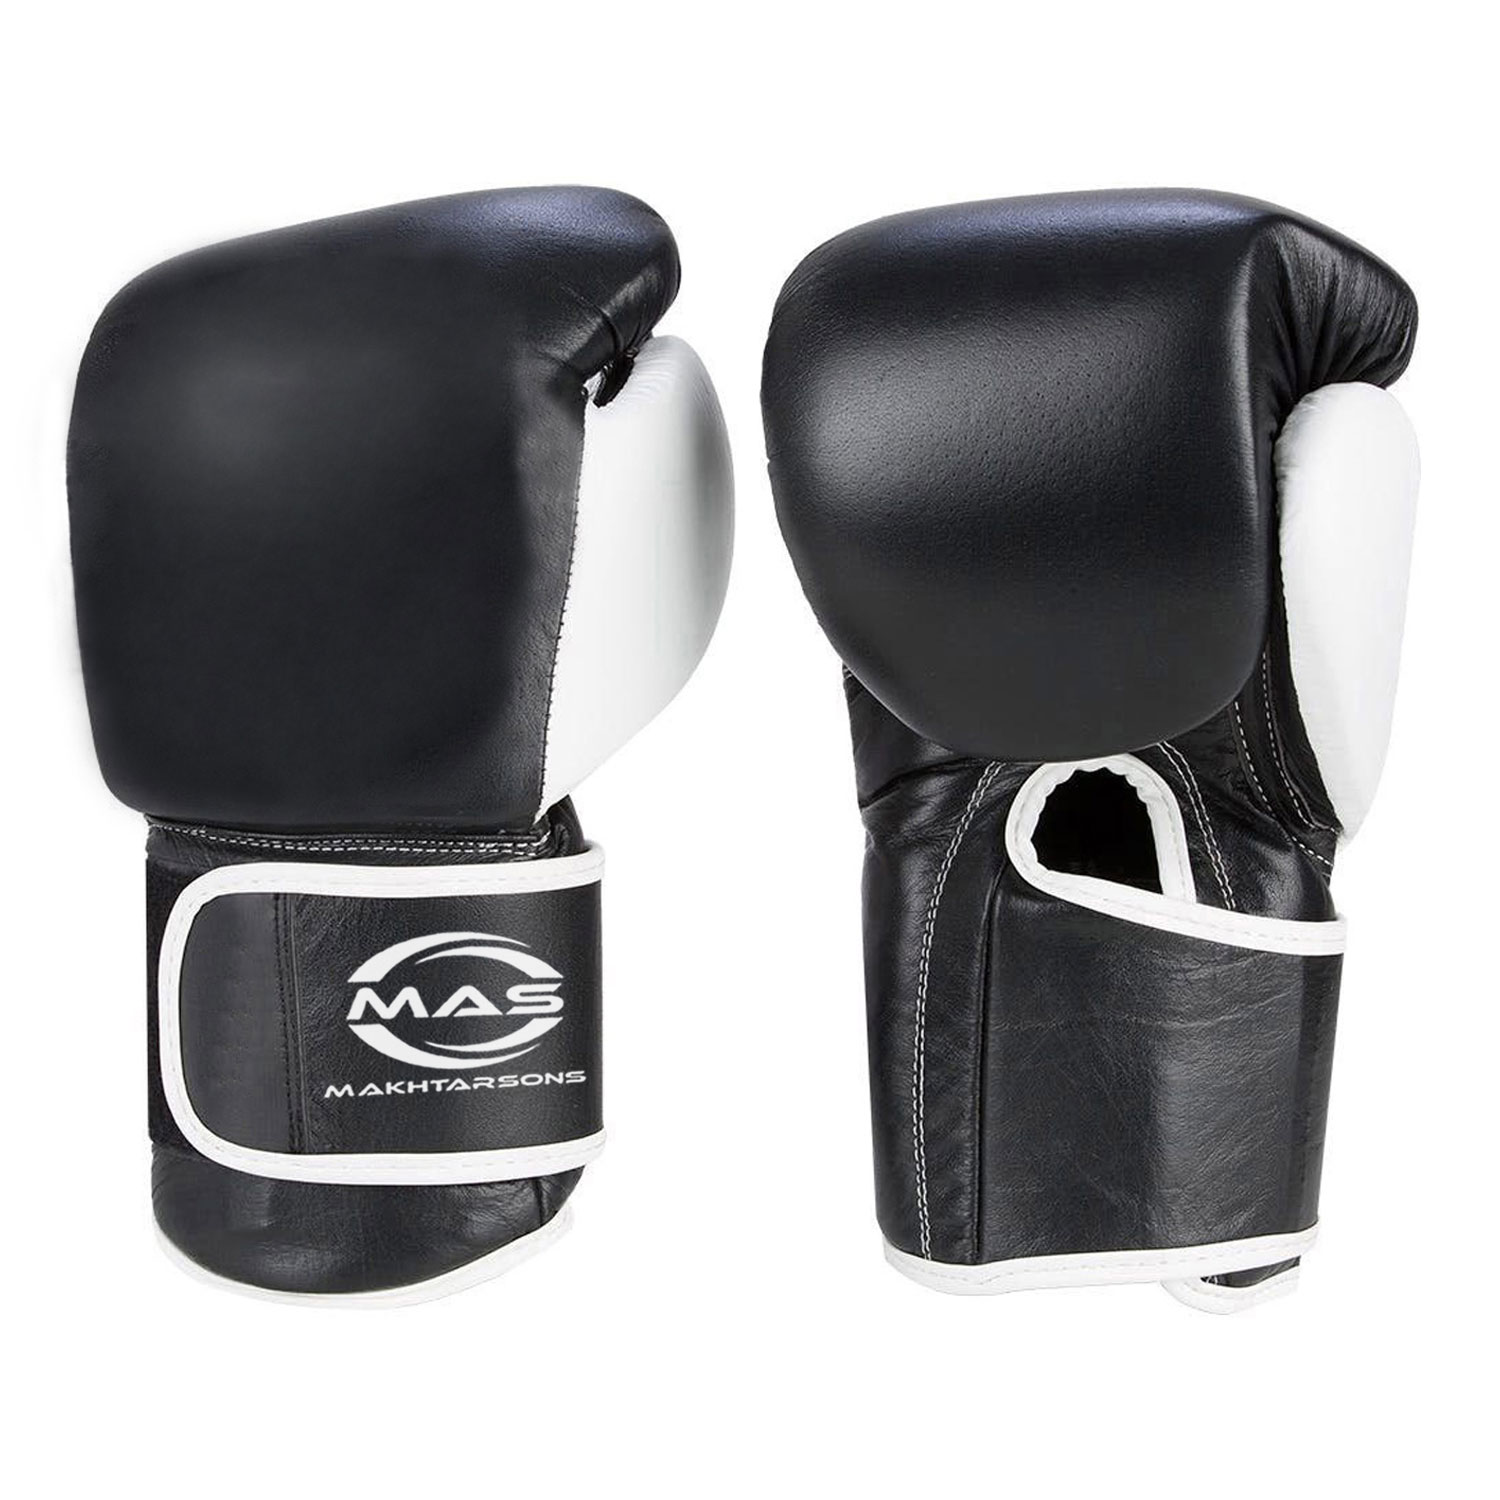 PROFESSIONAL BOXING GLOVES | MAS 211